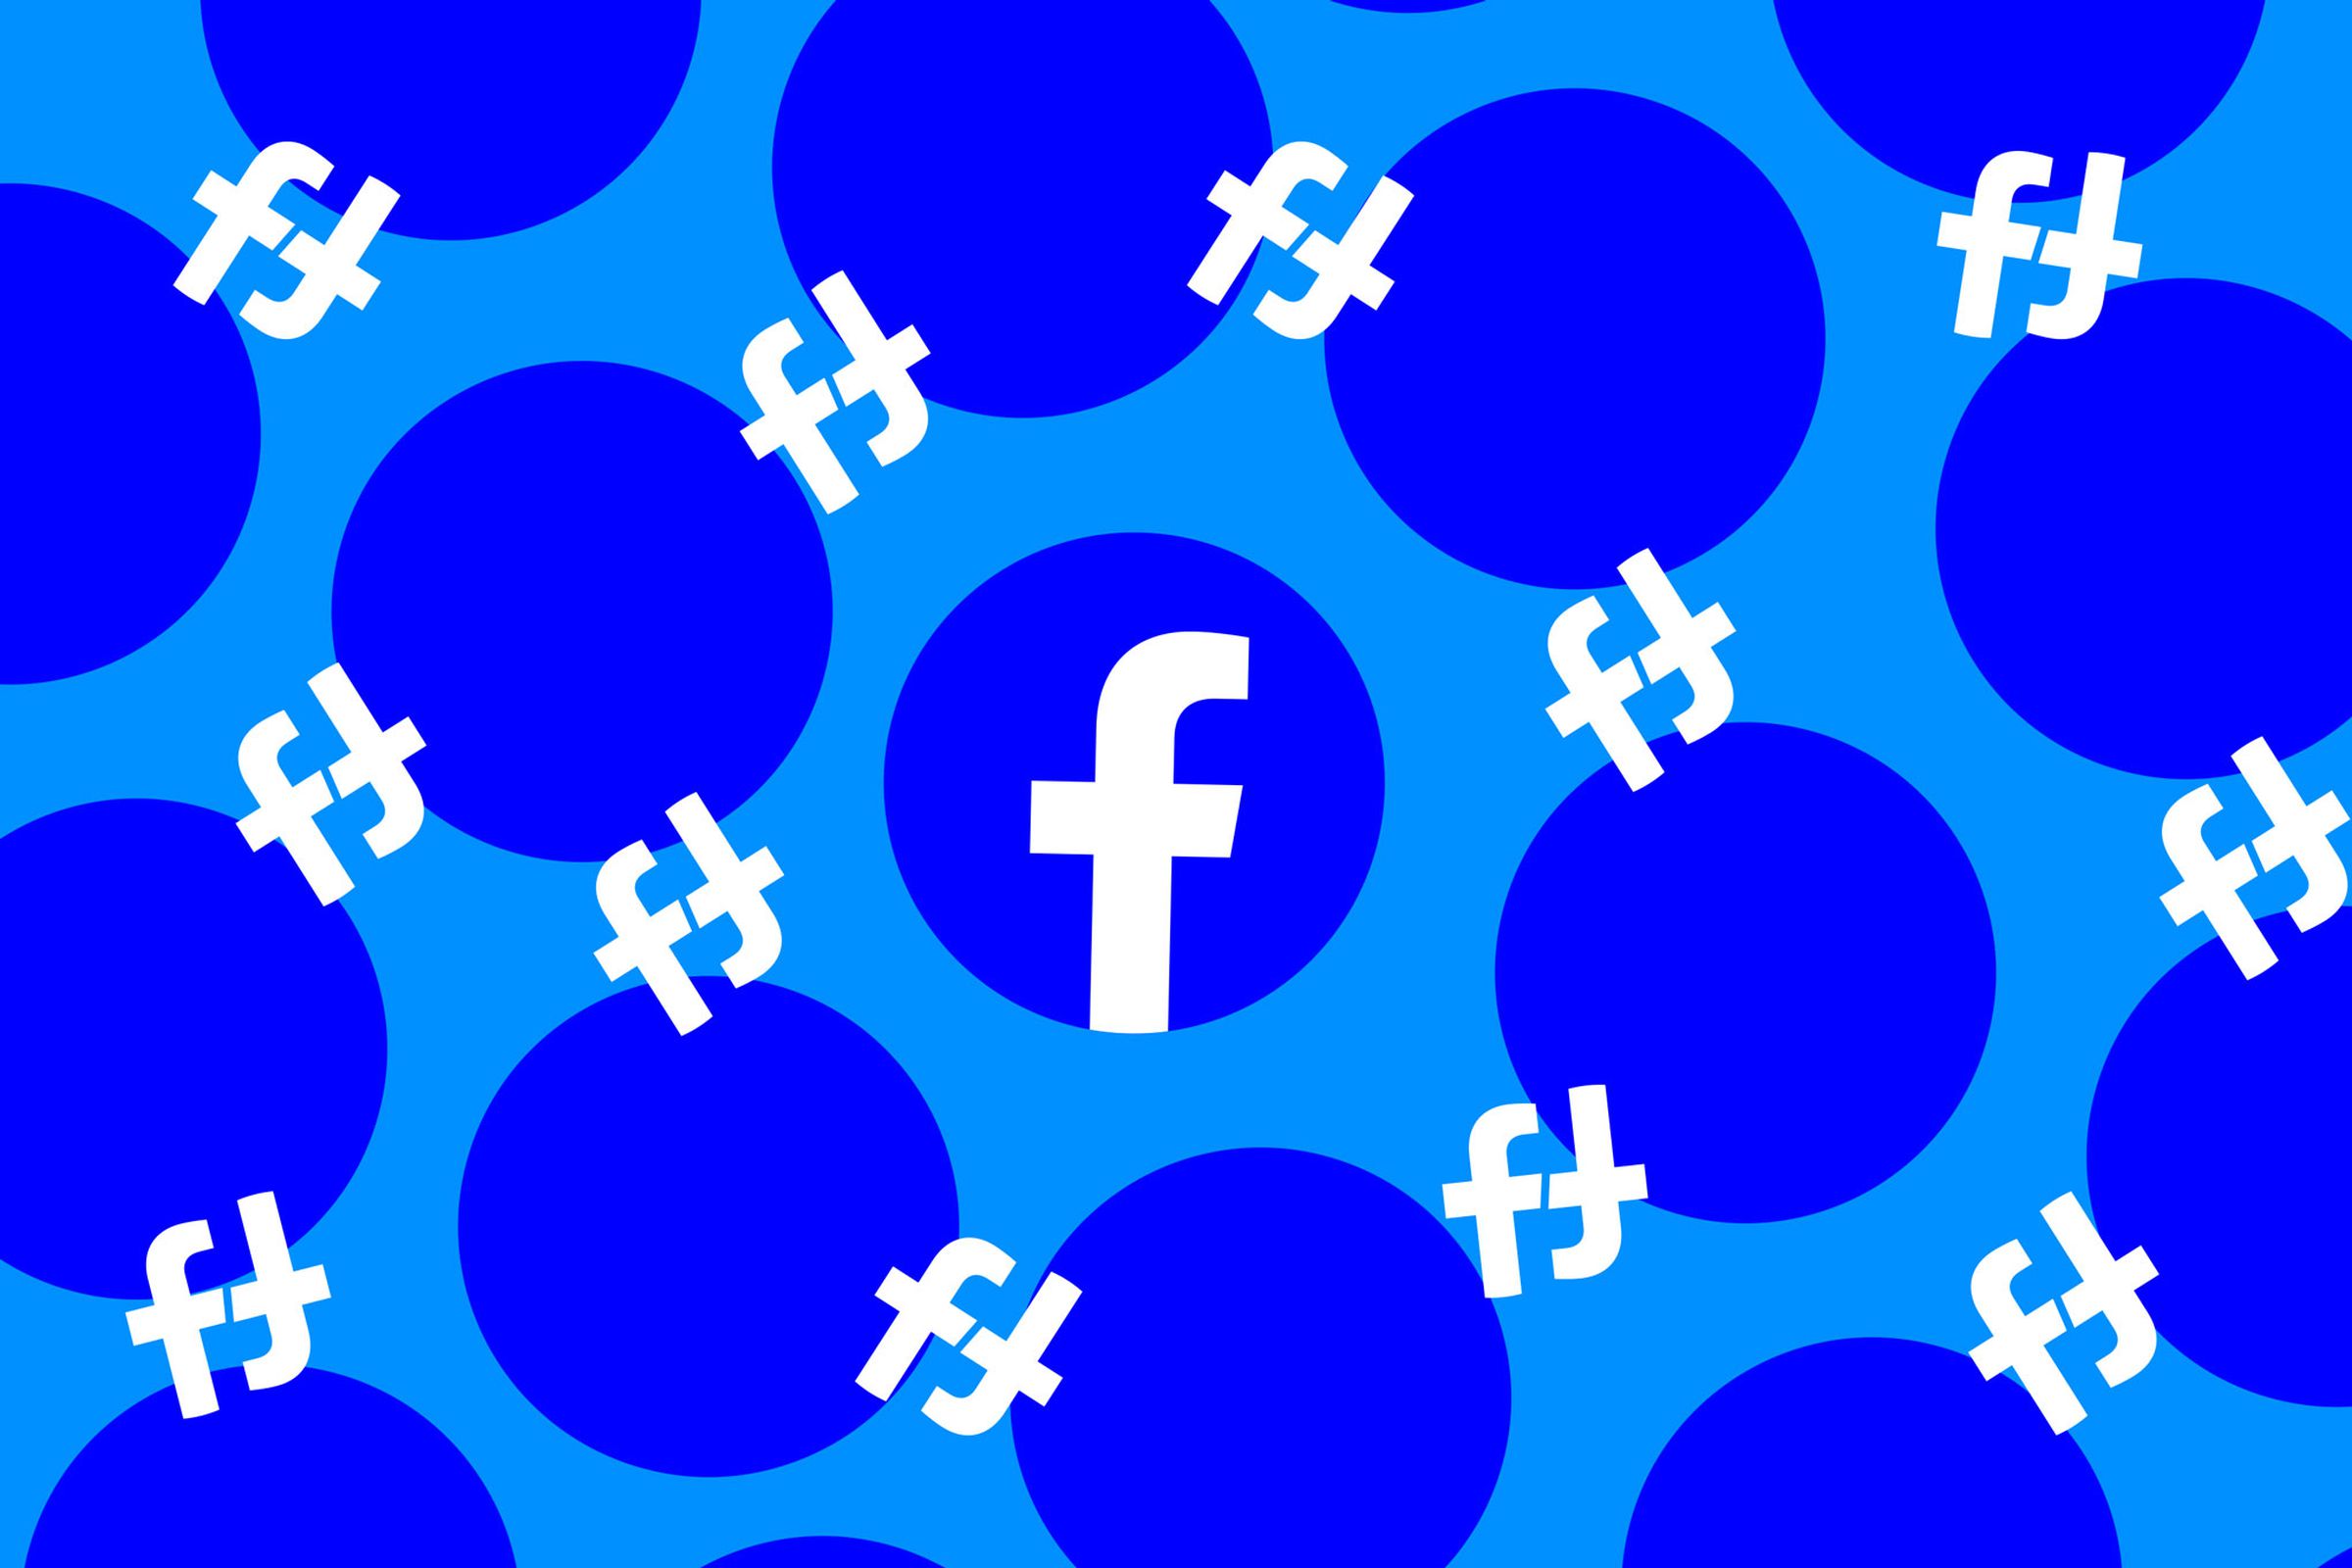 The Facebook logo on a blue background.